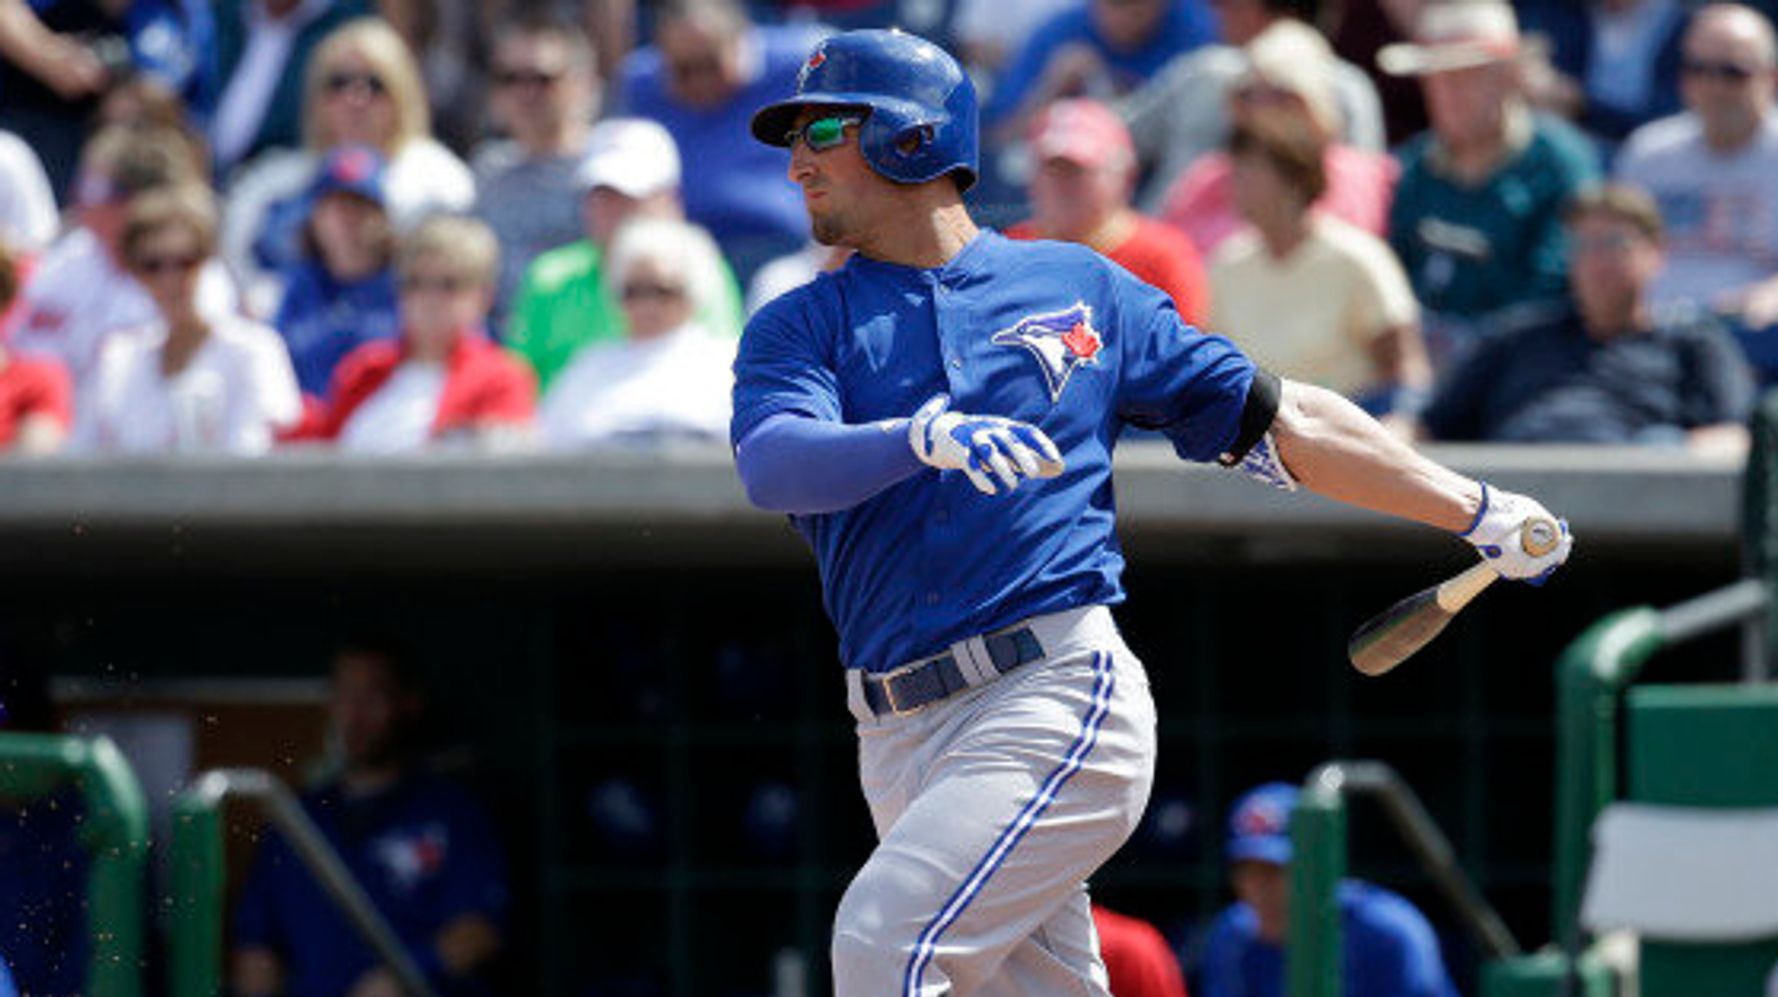 Blue Jays outfielder Kevin Pillar makes fun of his sneezing injury